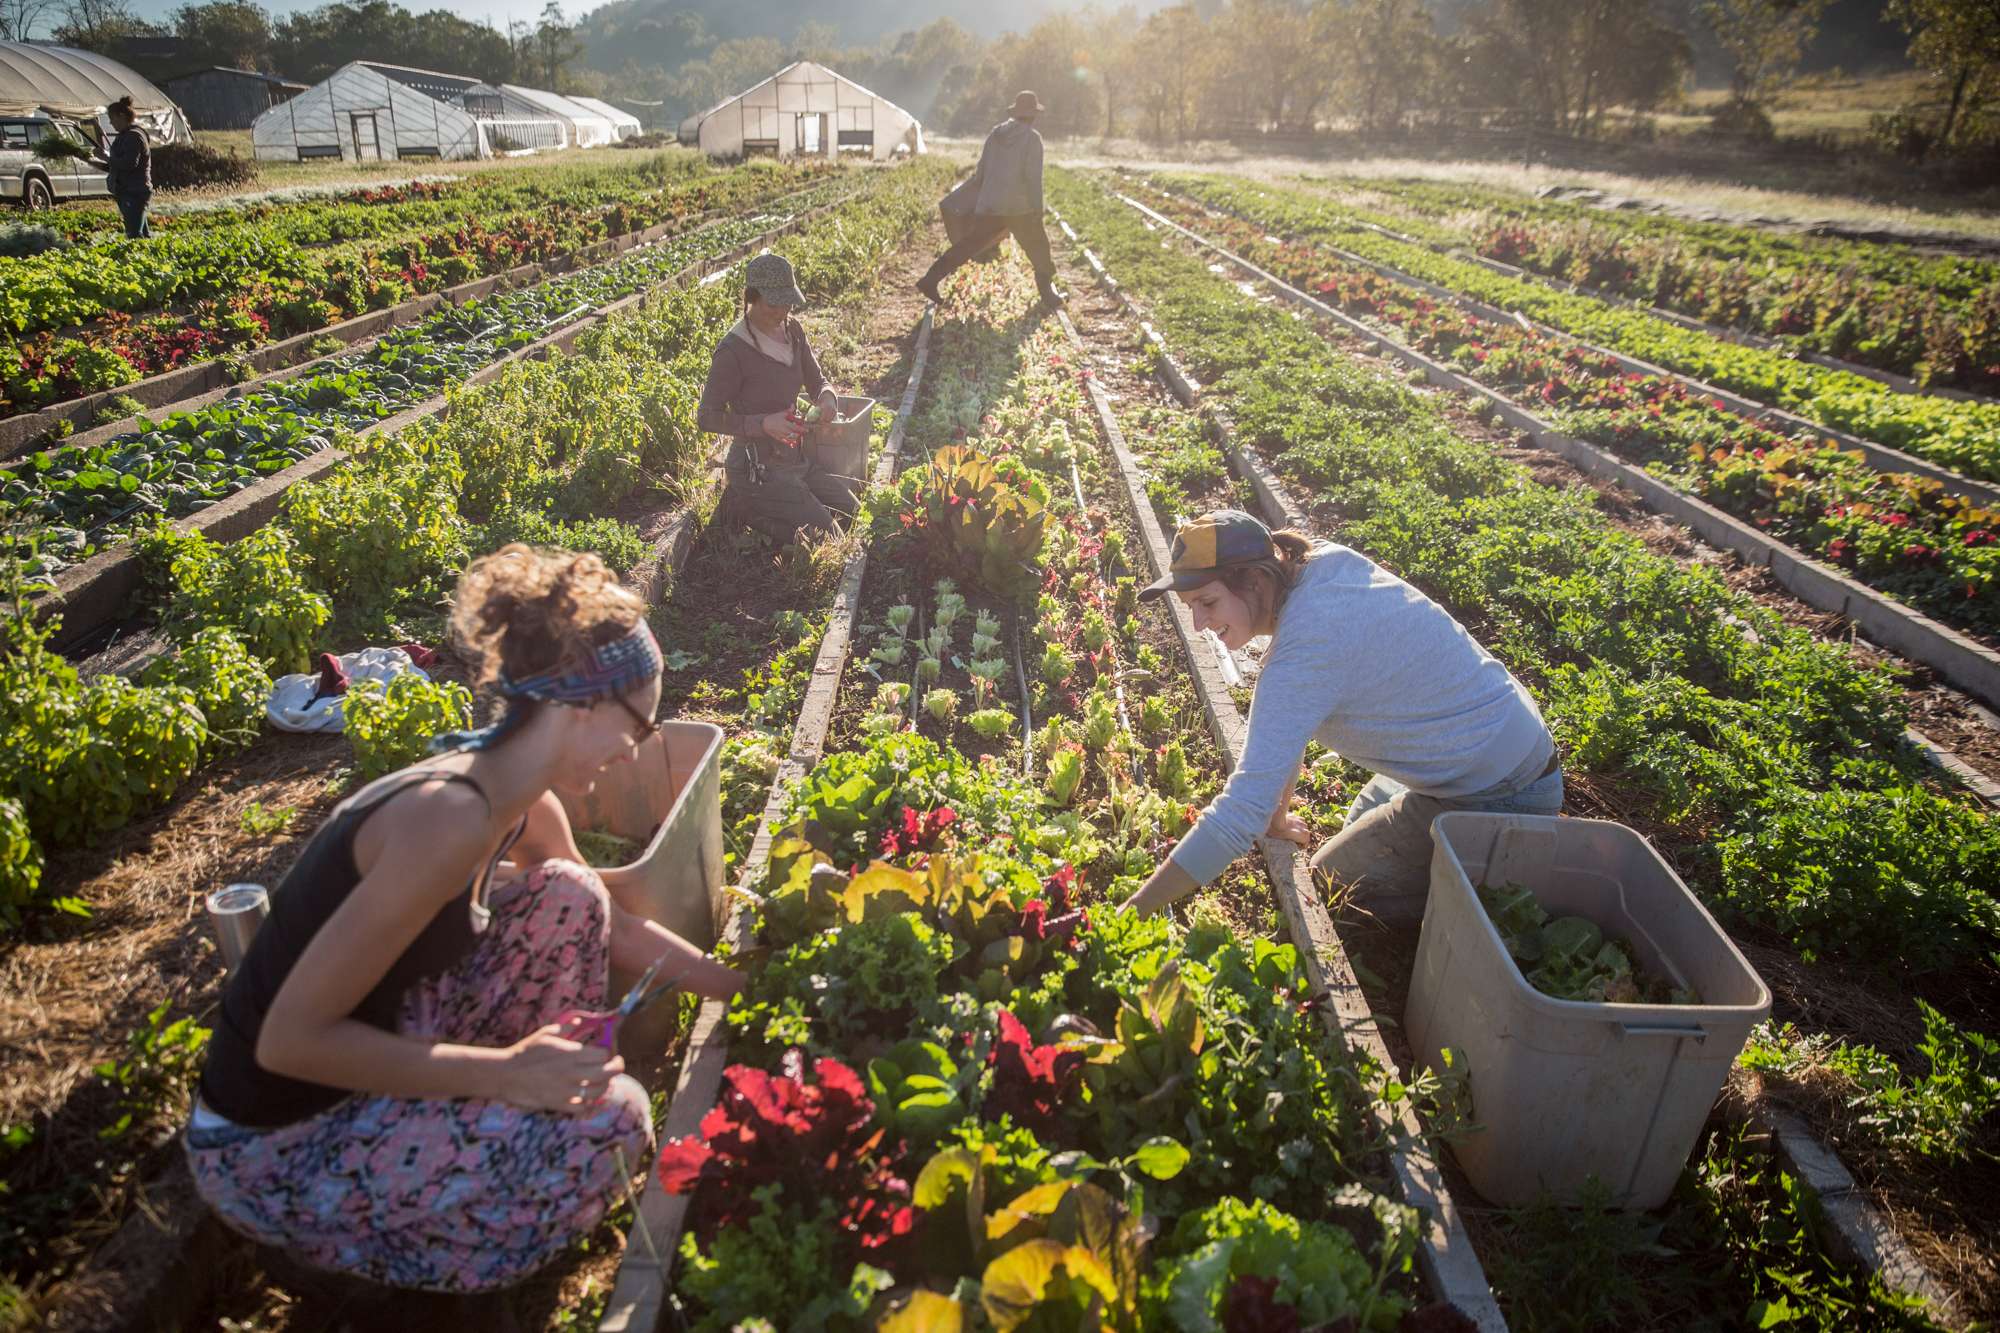 Workers at an organic farm collect fresh produce for local restaurants and sale